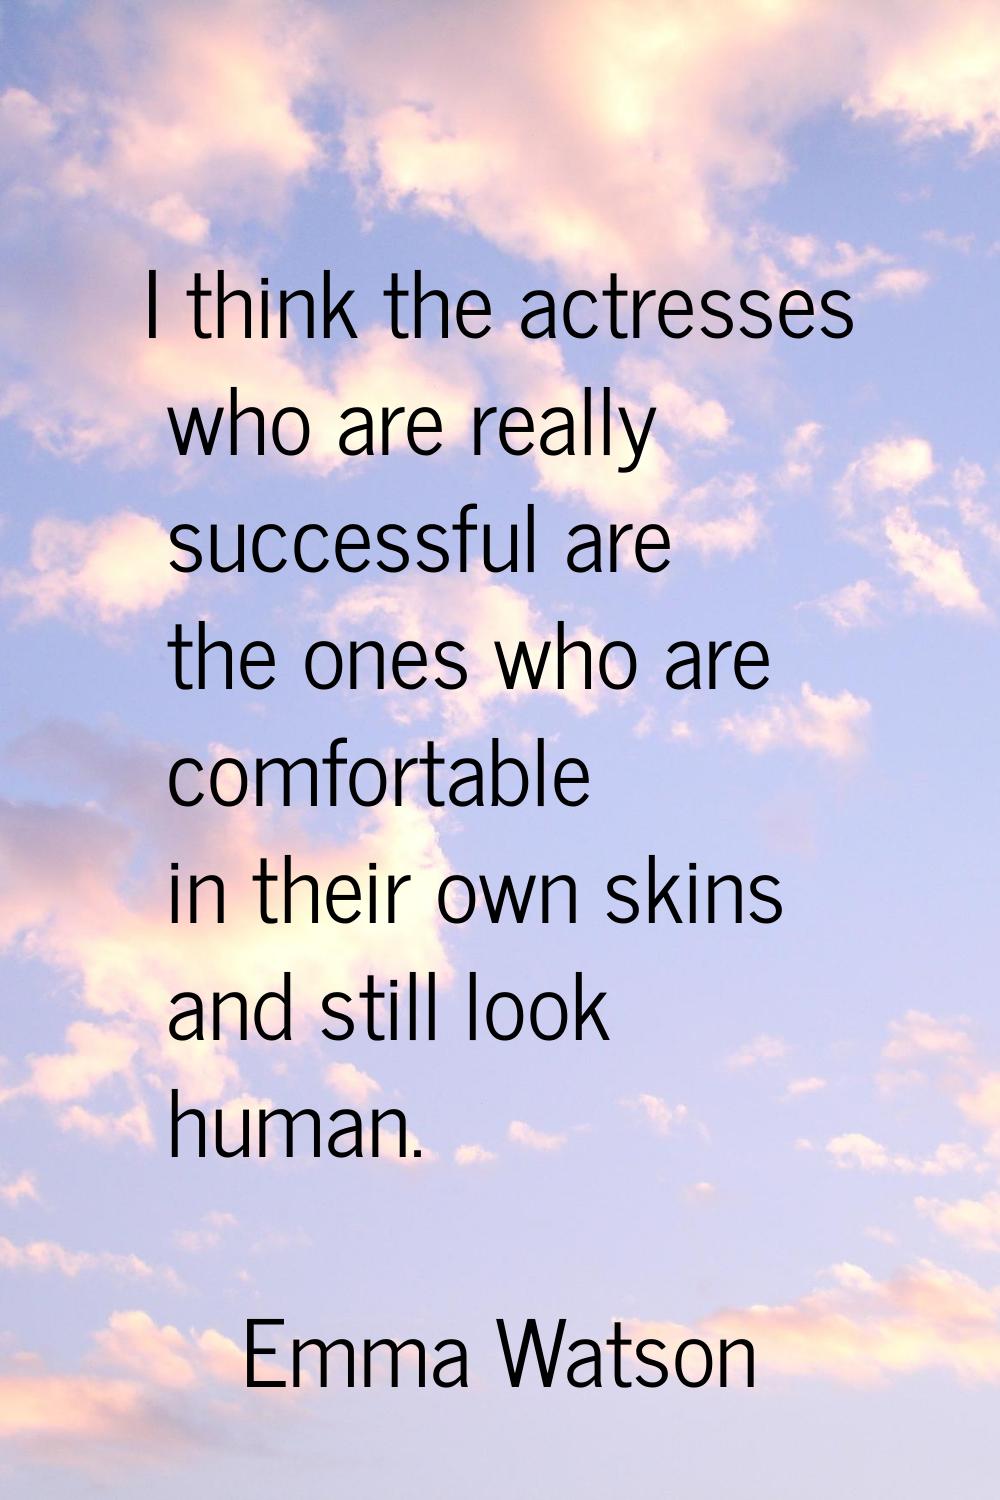 I think the actresses who are really successful are the ones who are comfortable in their own skins